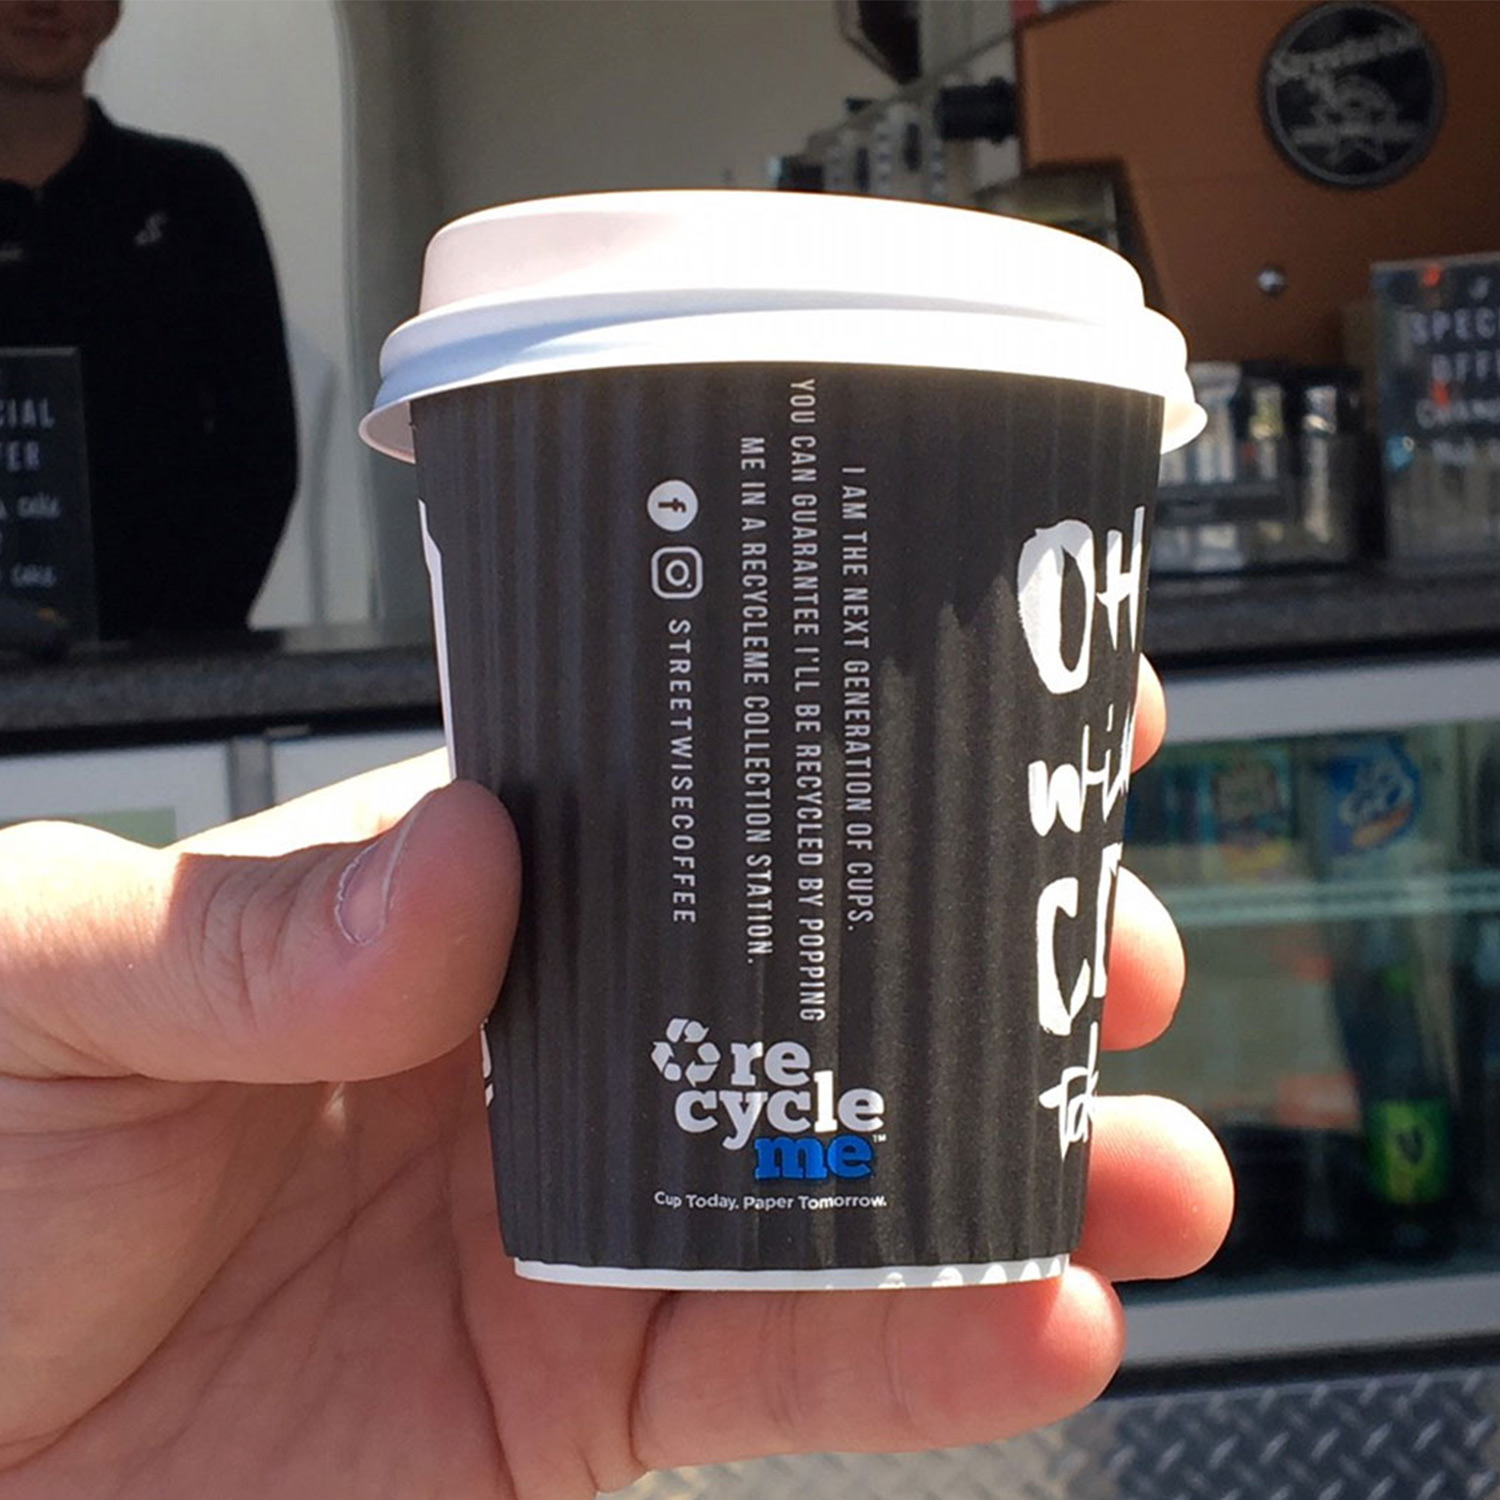 Image of takeaway coffee cup from Steetwise coffee